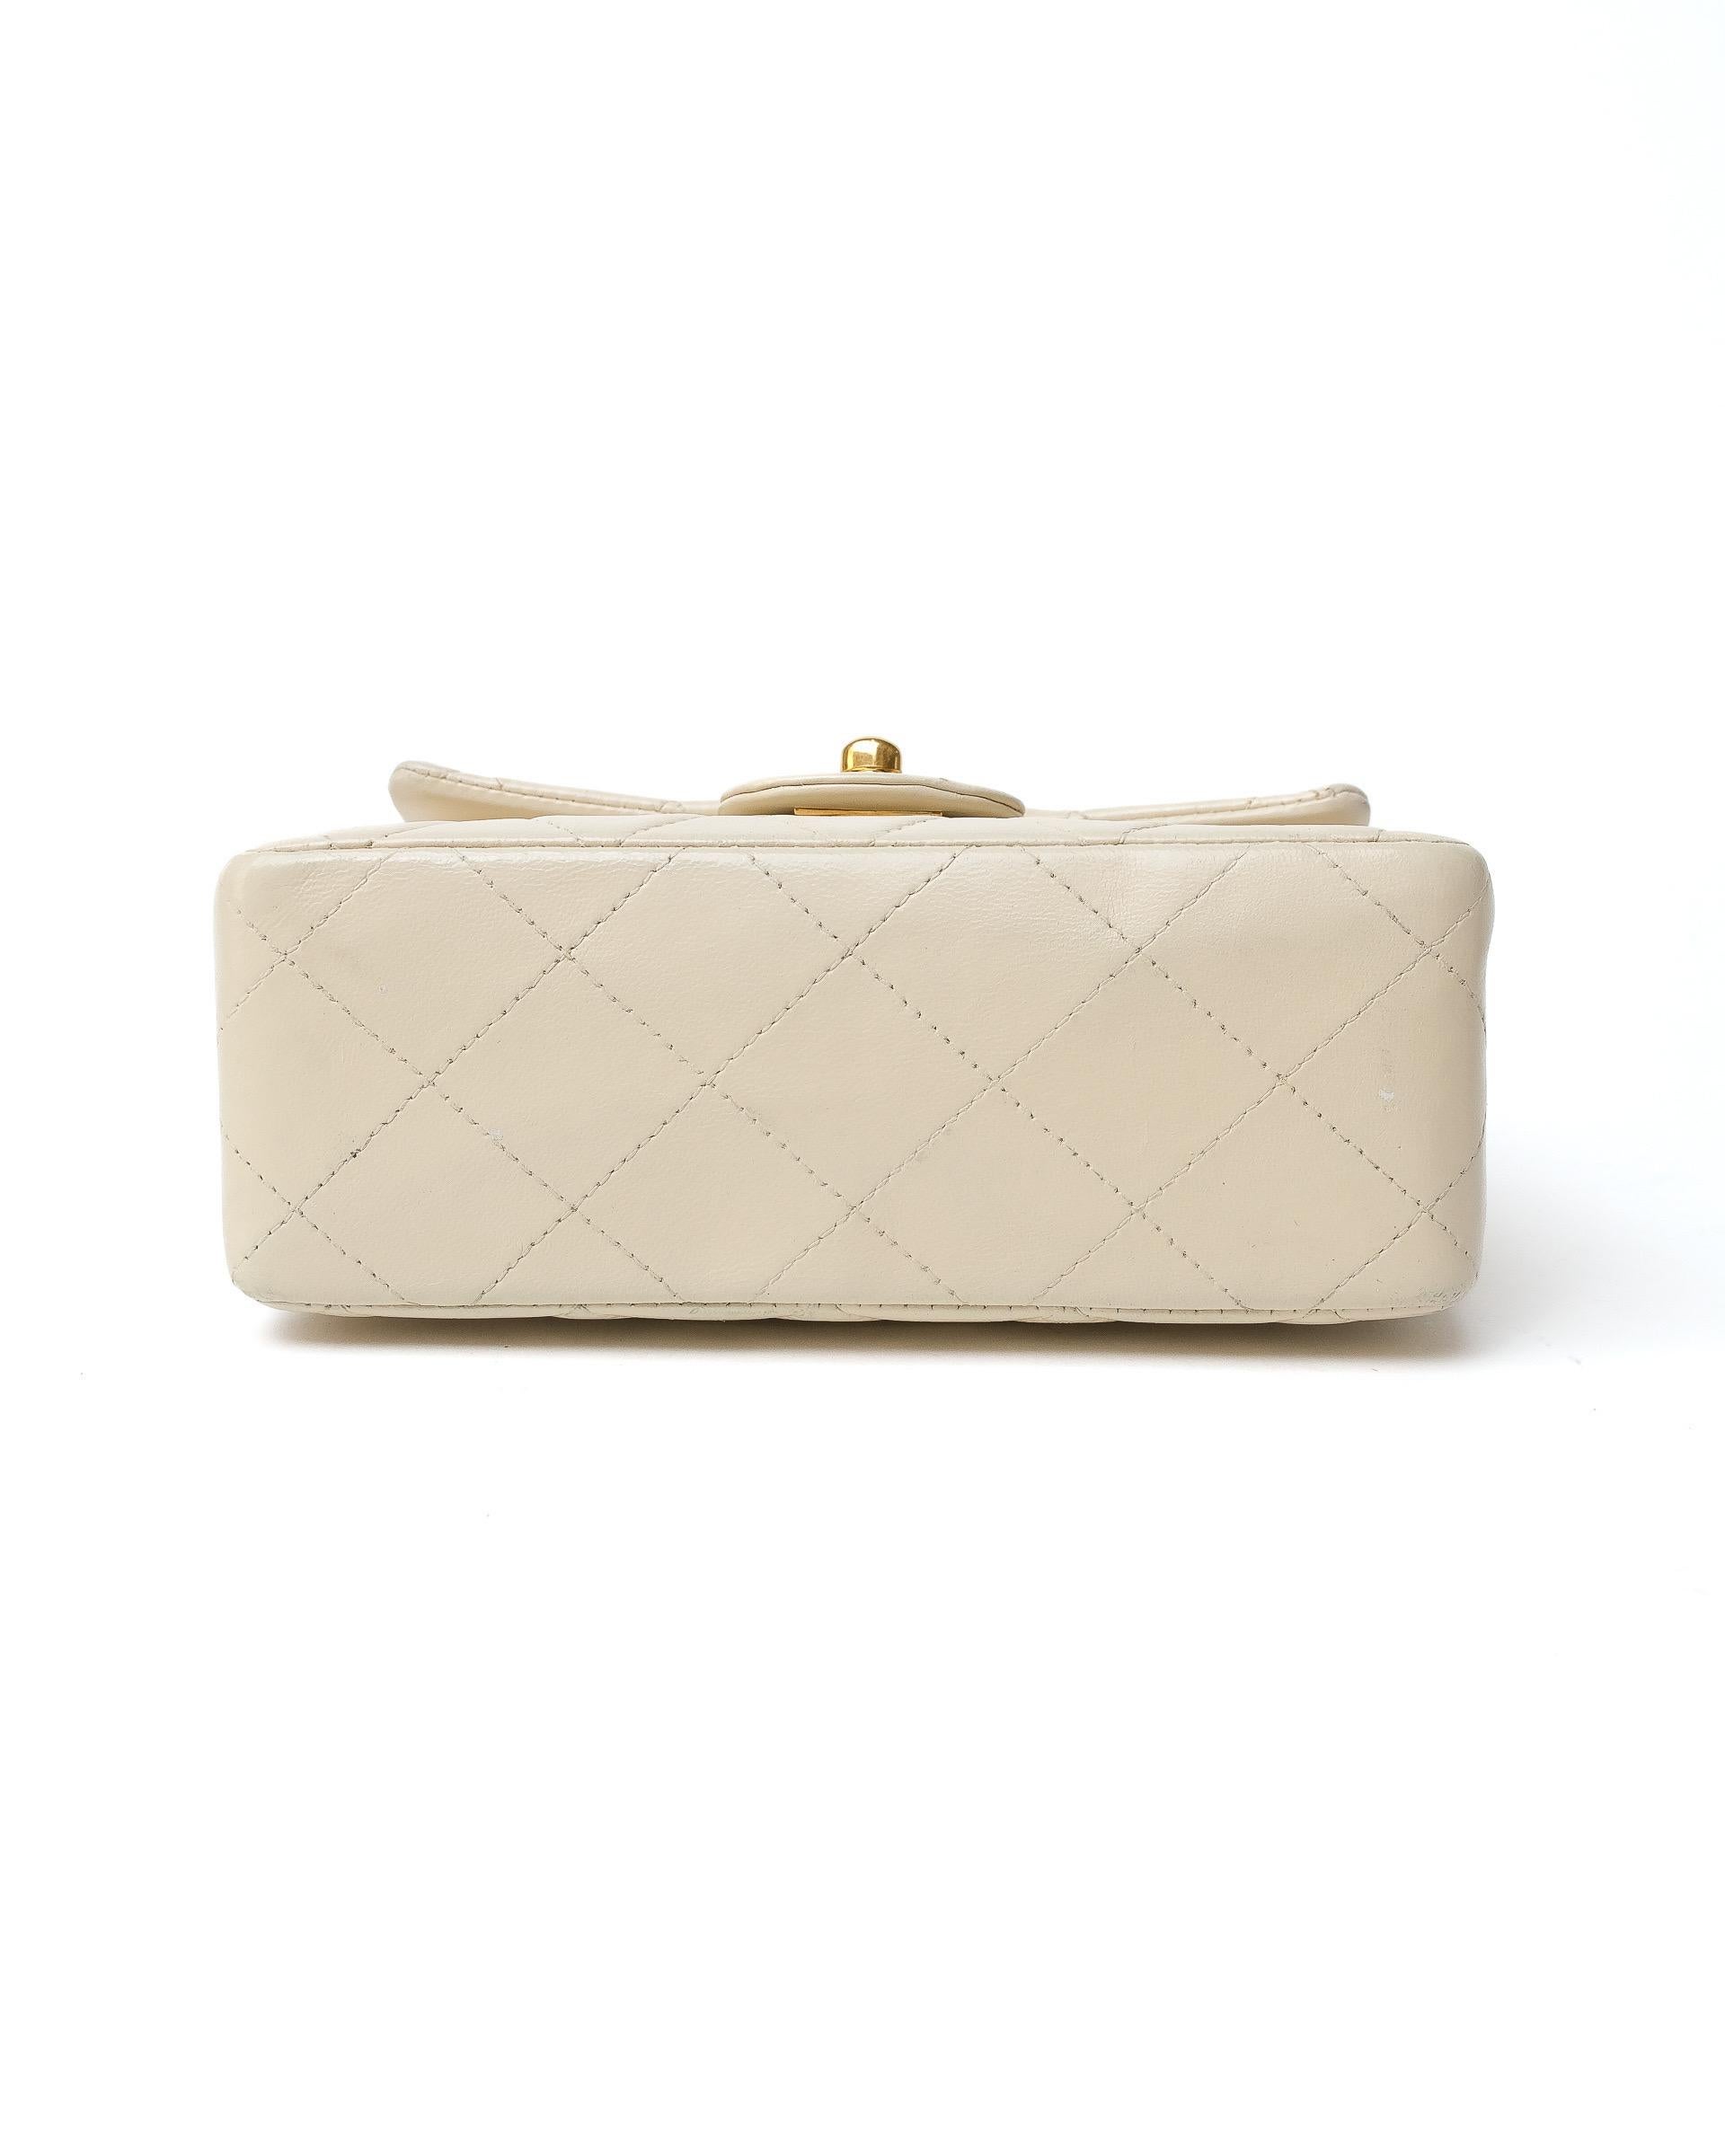 Chanel Mini Flap Timeless Crema For Sale 8